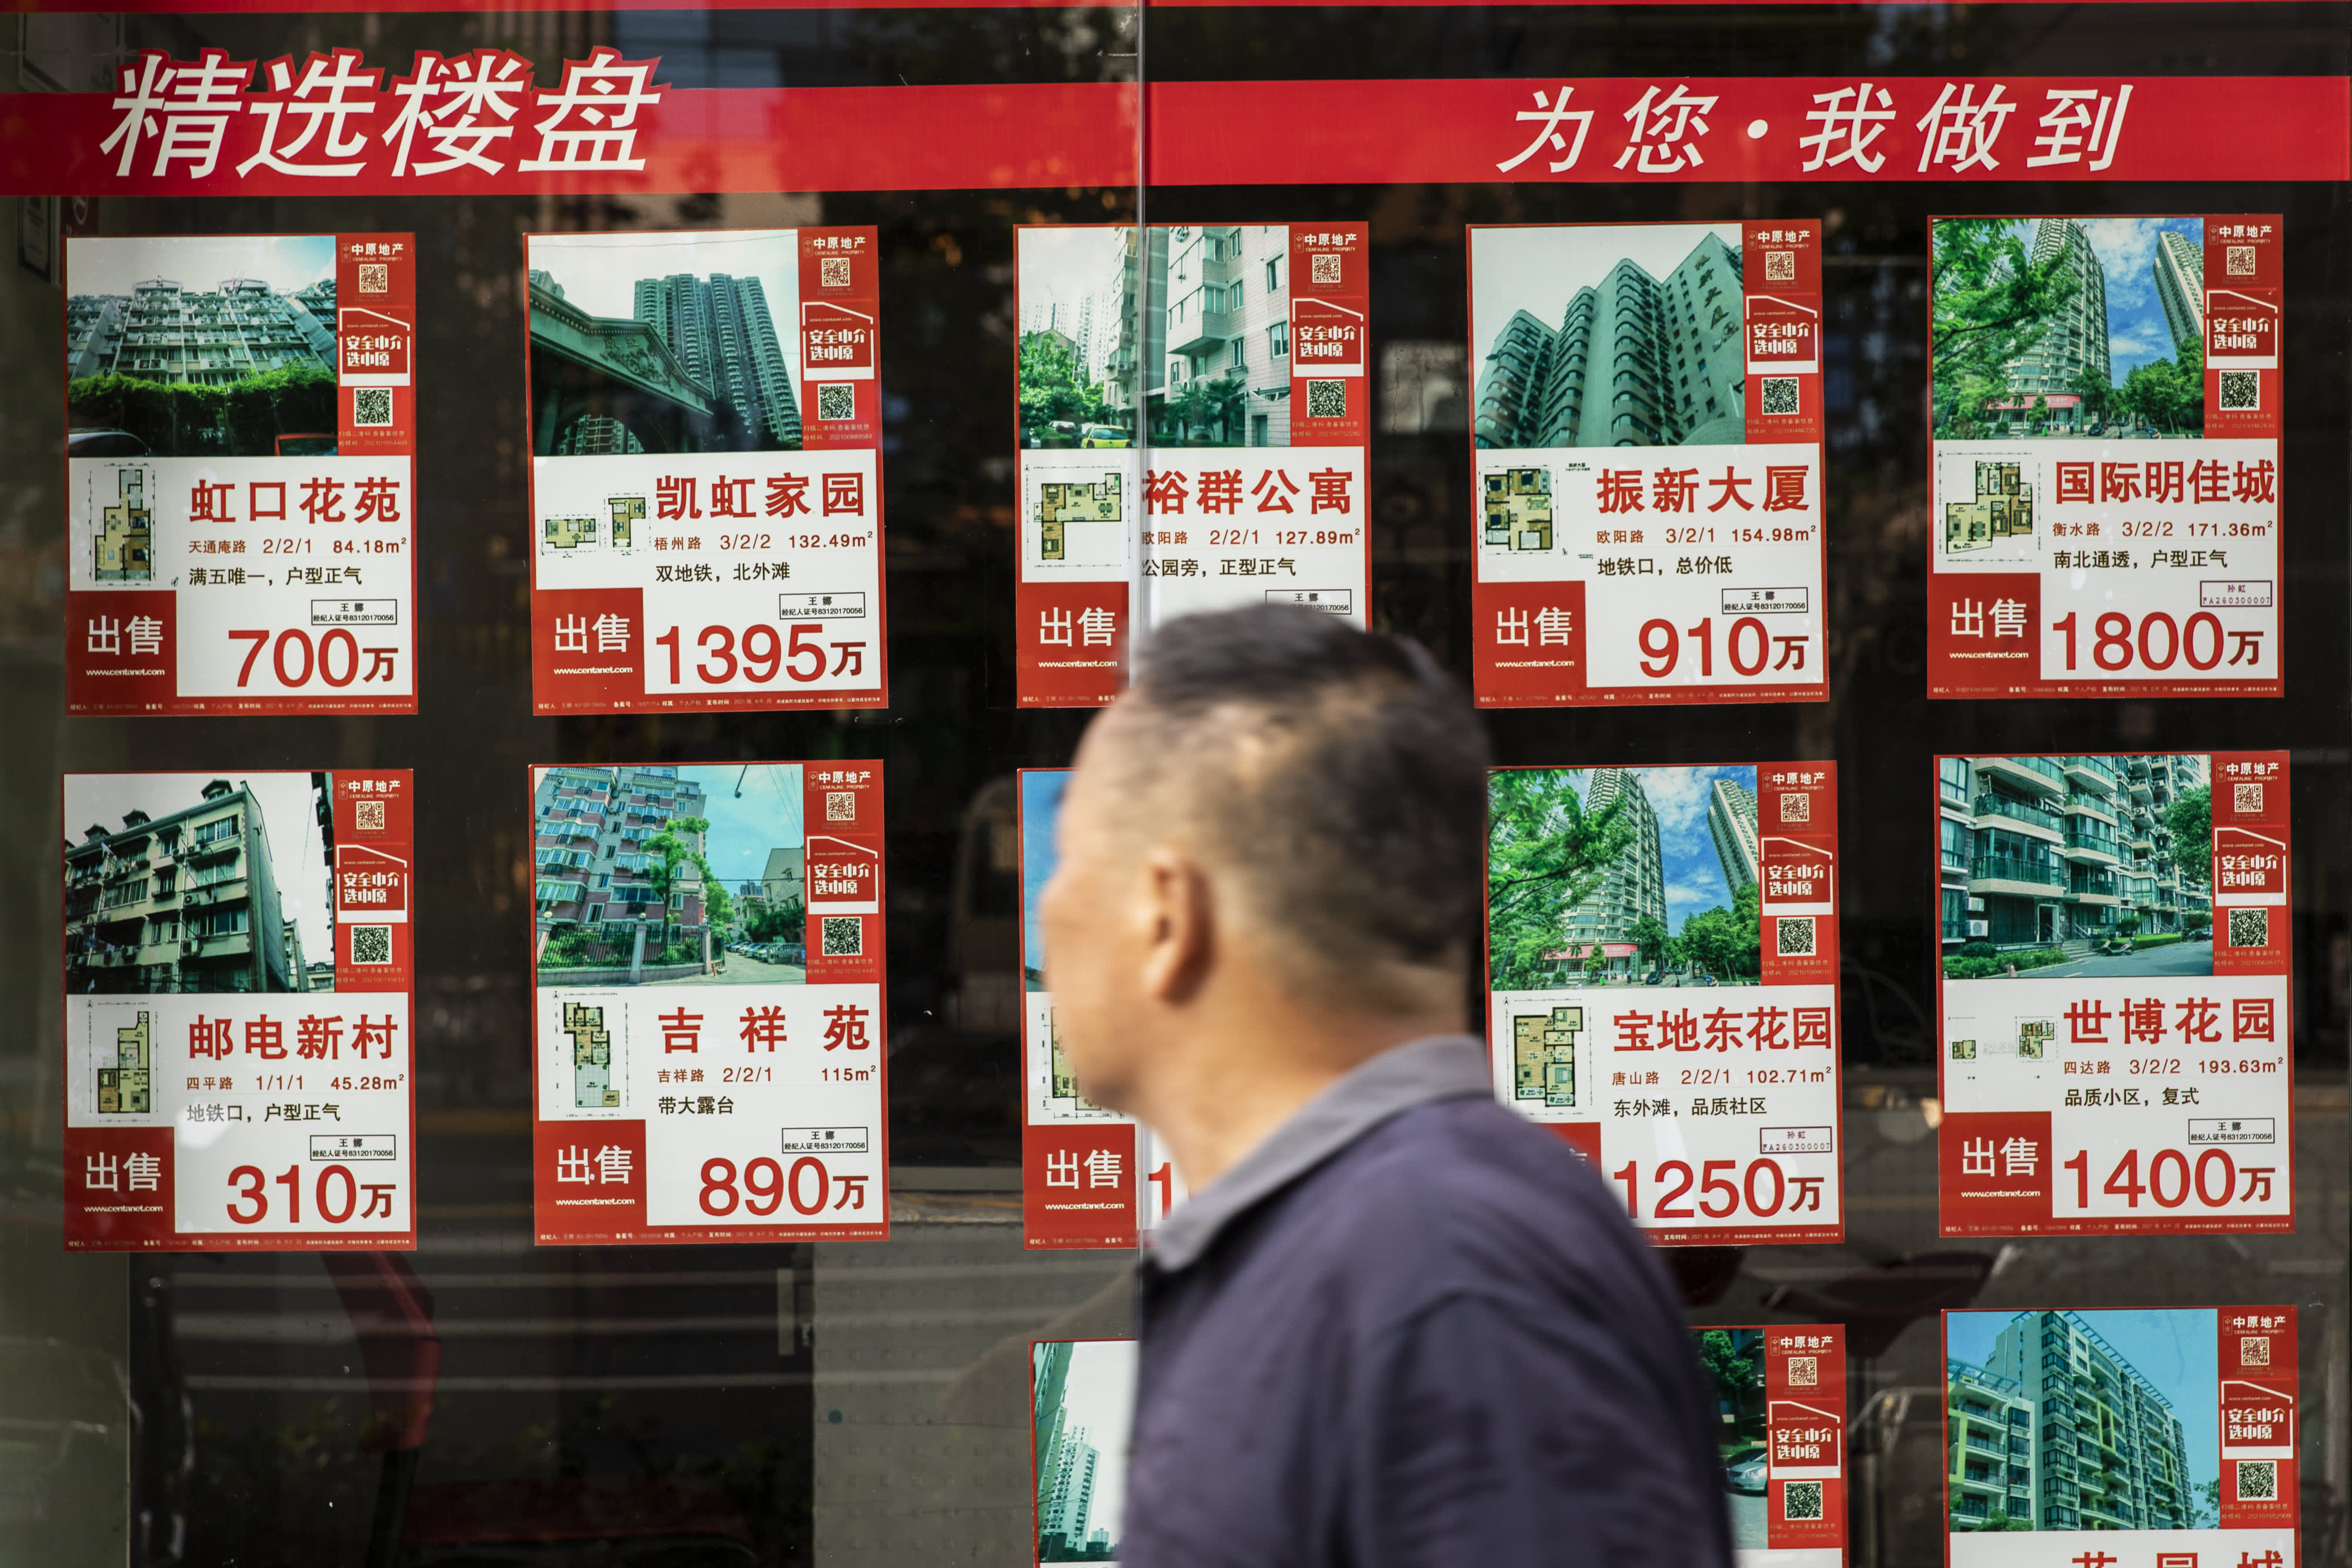 China's real estate uncertainties persist, fueling market anxiety - CNBC